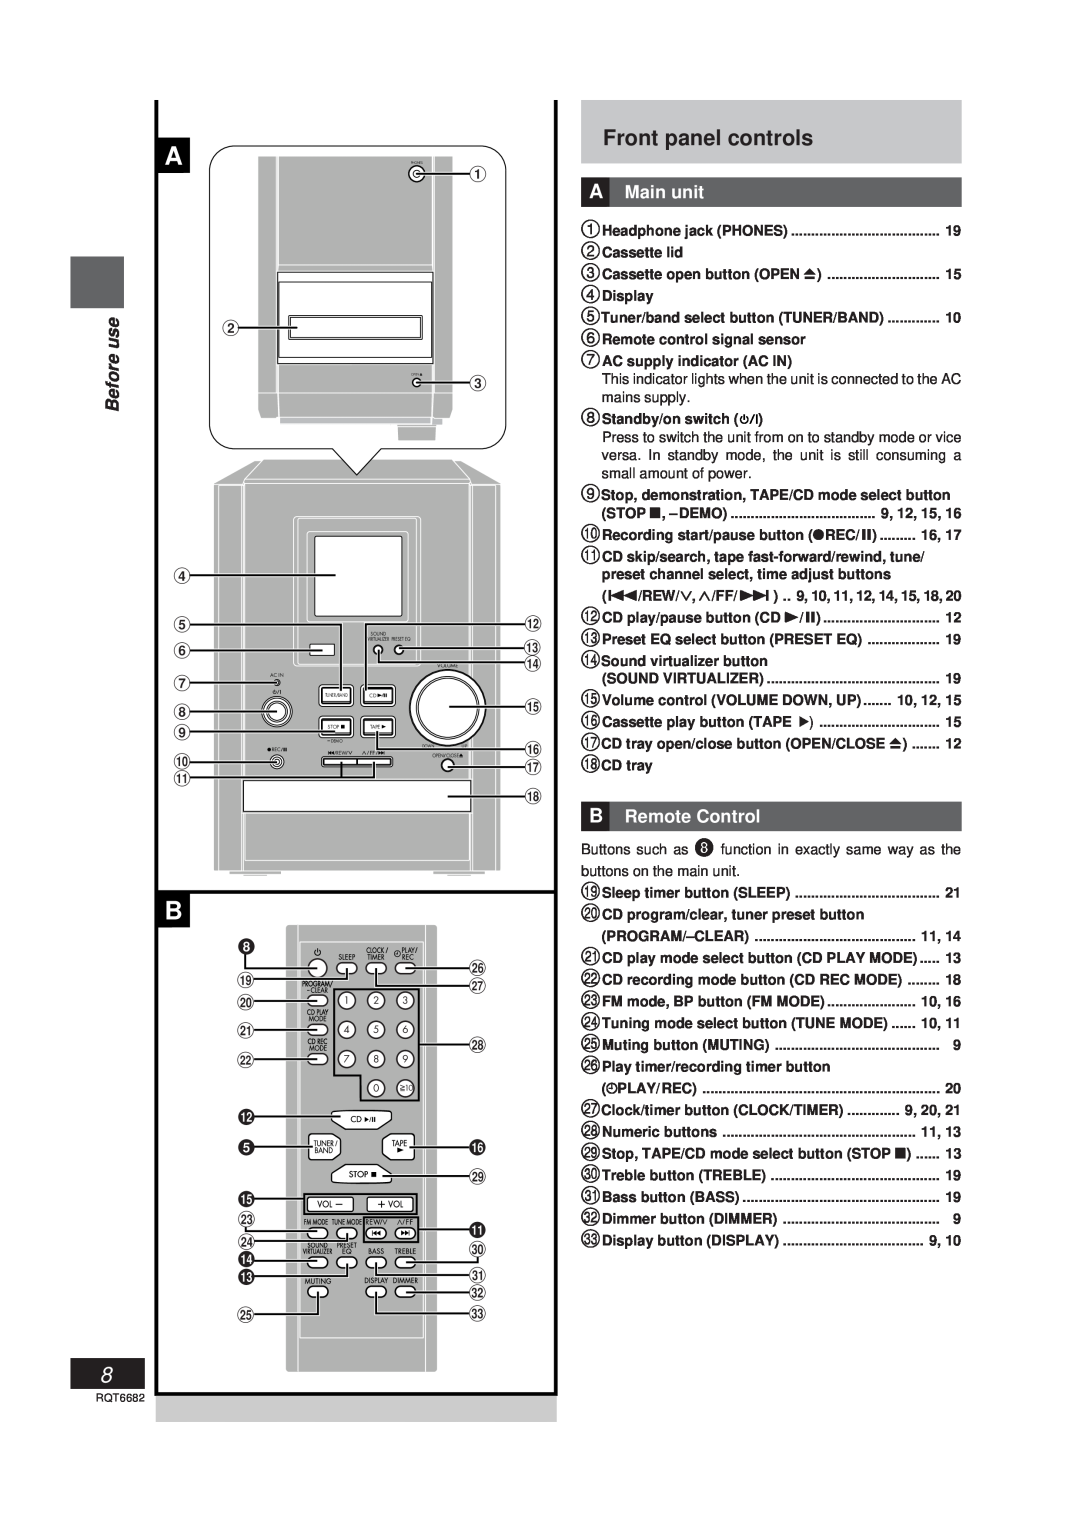 Panasonic SC-PM10 operating instructions Front panel controls, A Main unit, B Remote Control, Before use 